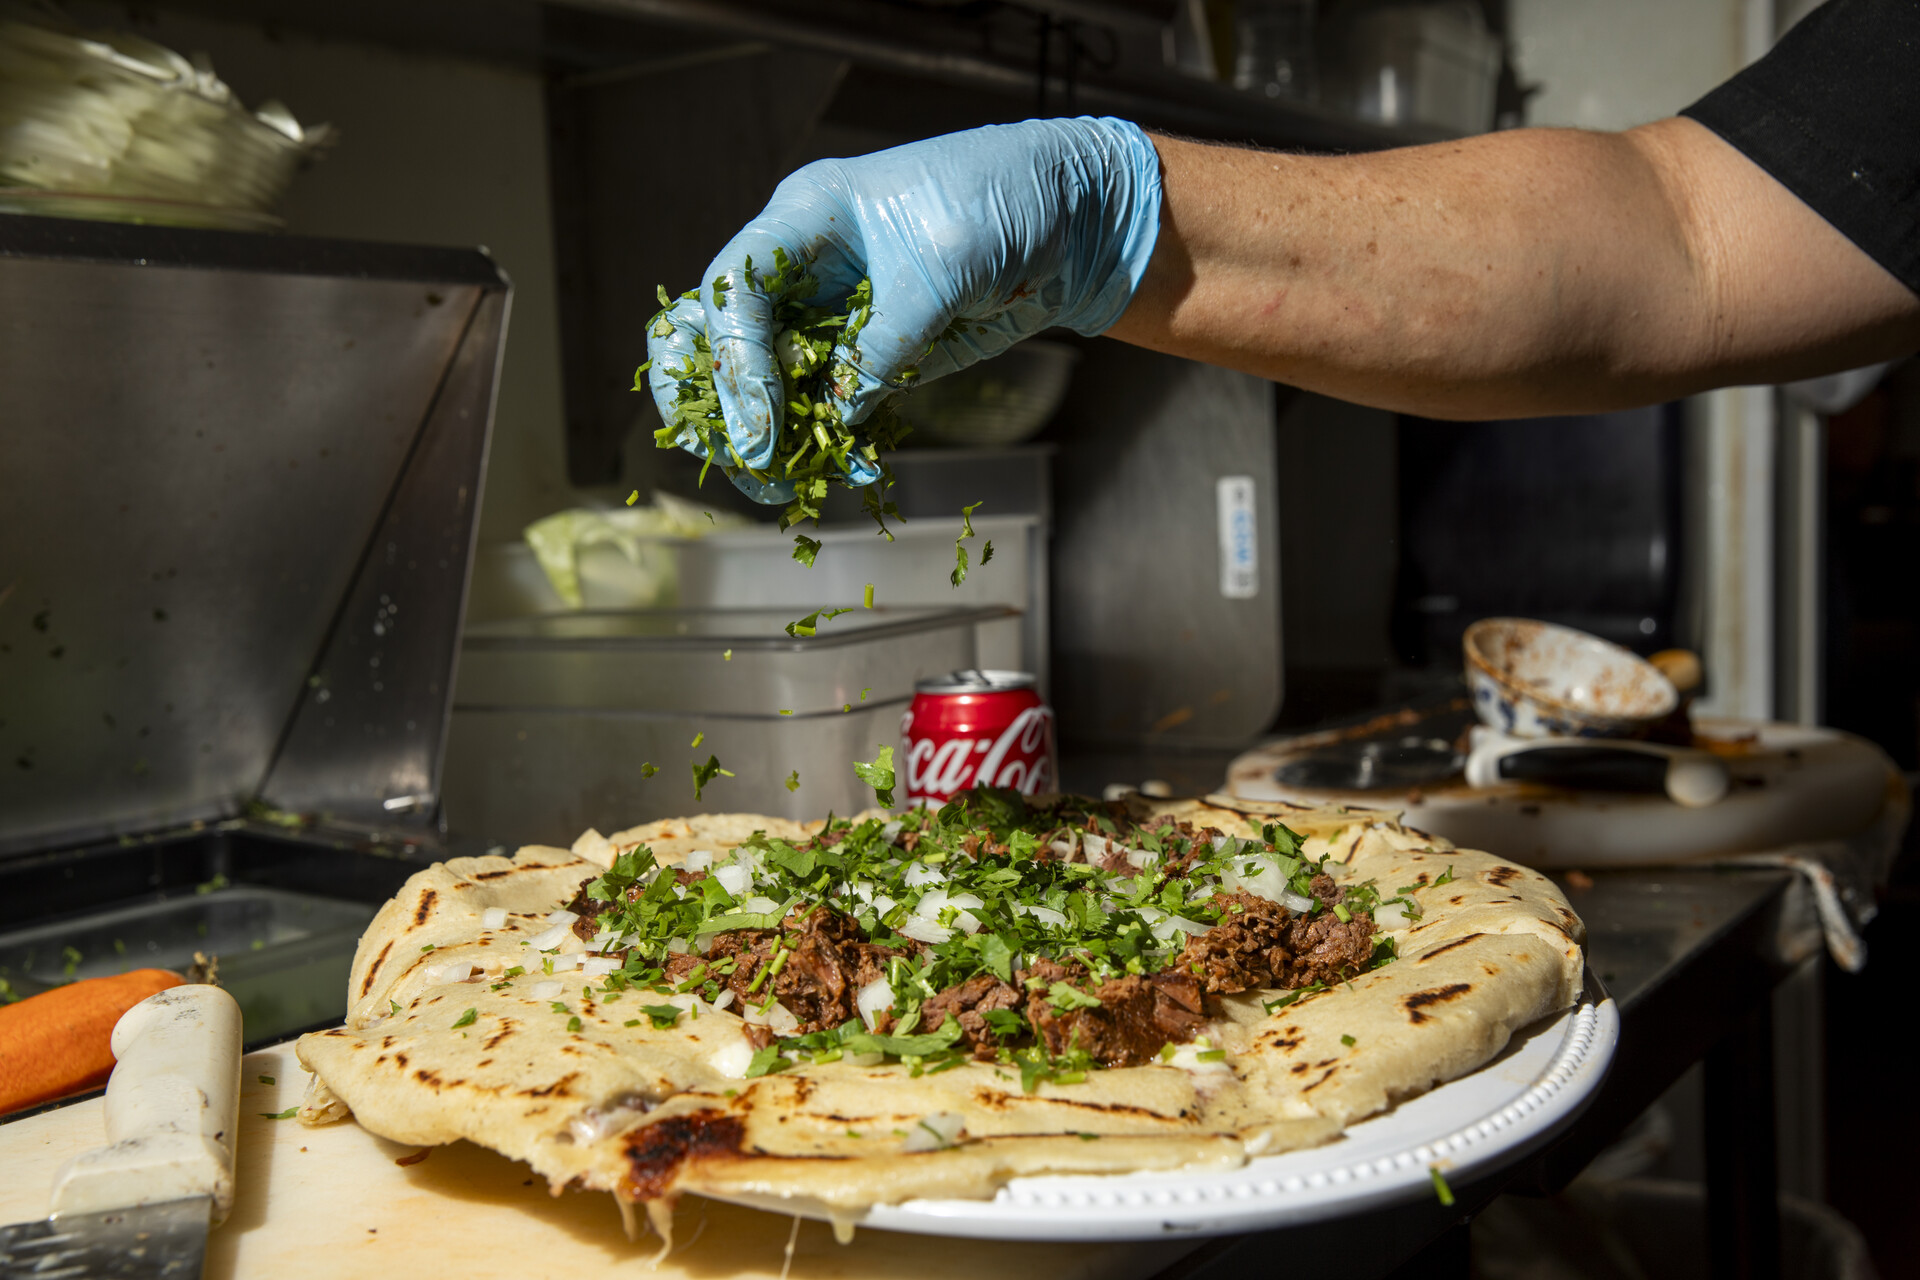 Rubber gloved hand sprinkles chopped cilantro onto an oversized pupusa topped the meat.